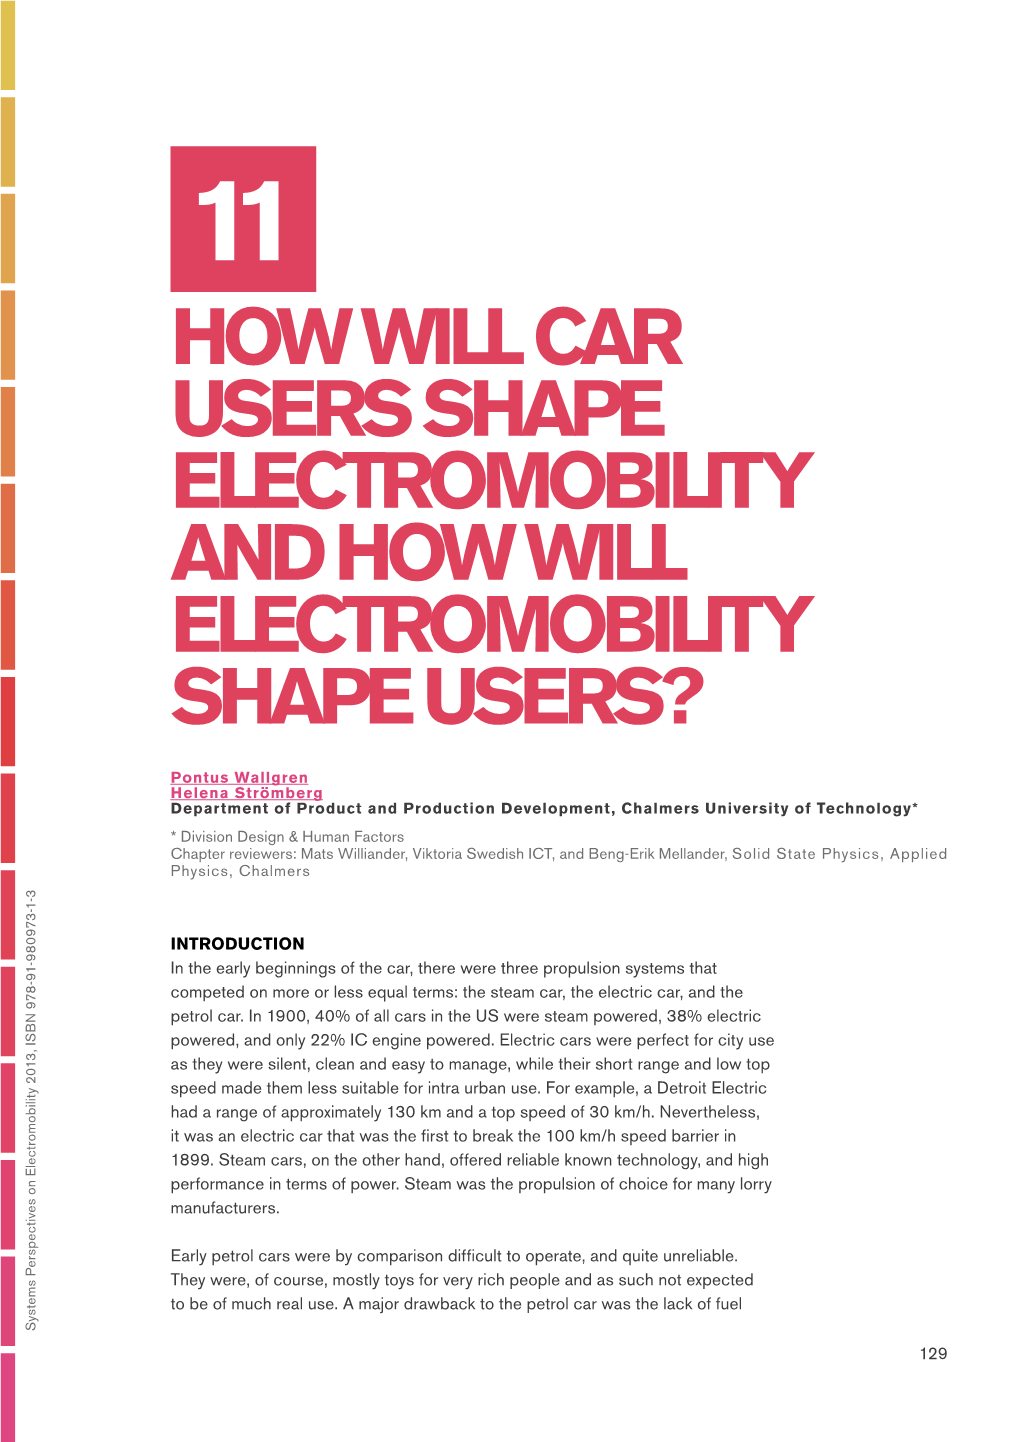 How Will Car Users Shape Electromobility and How Will Electromobility Shape Users?